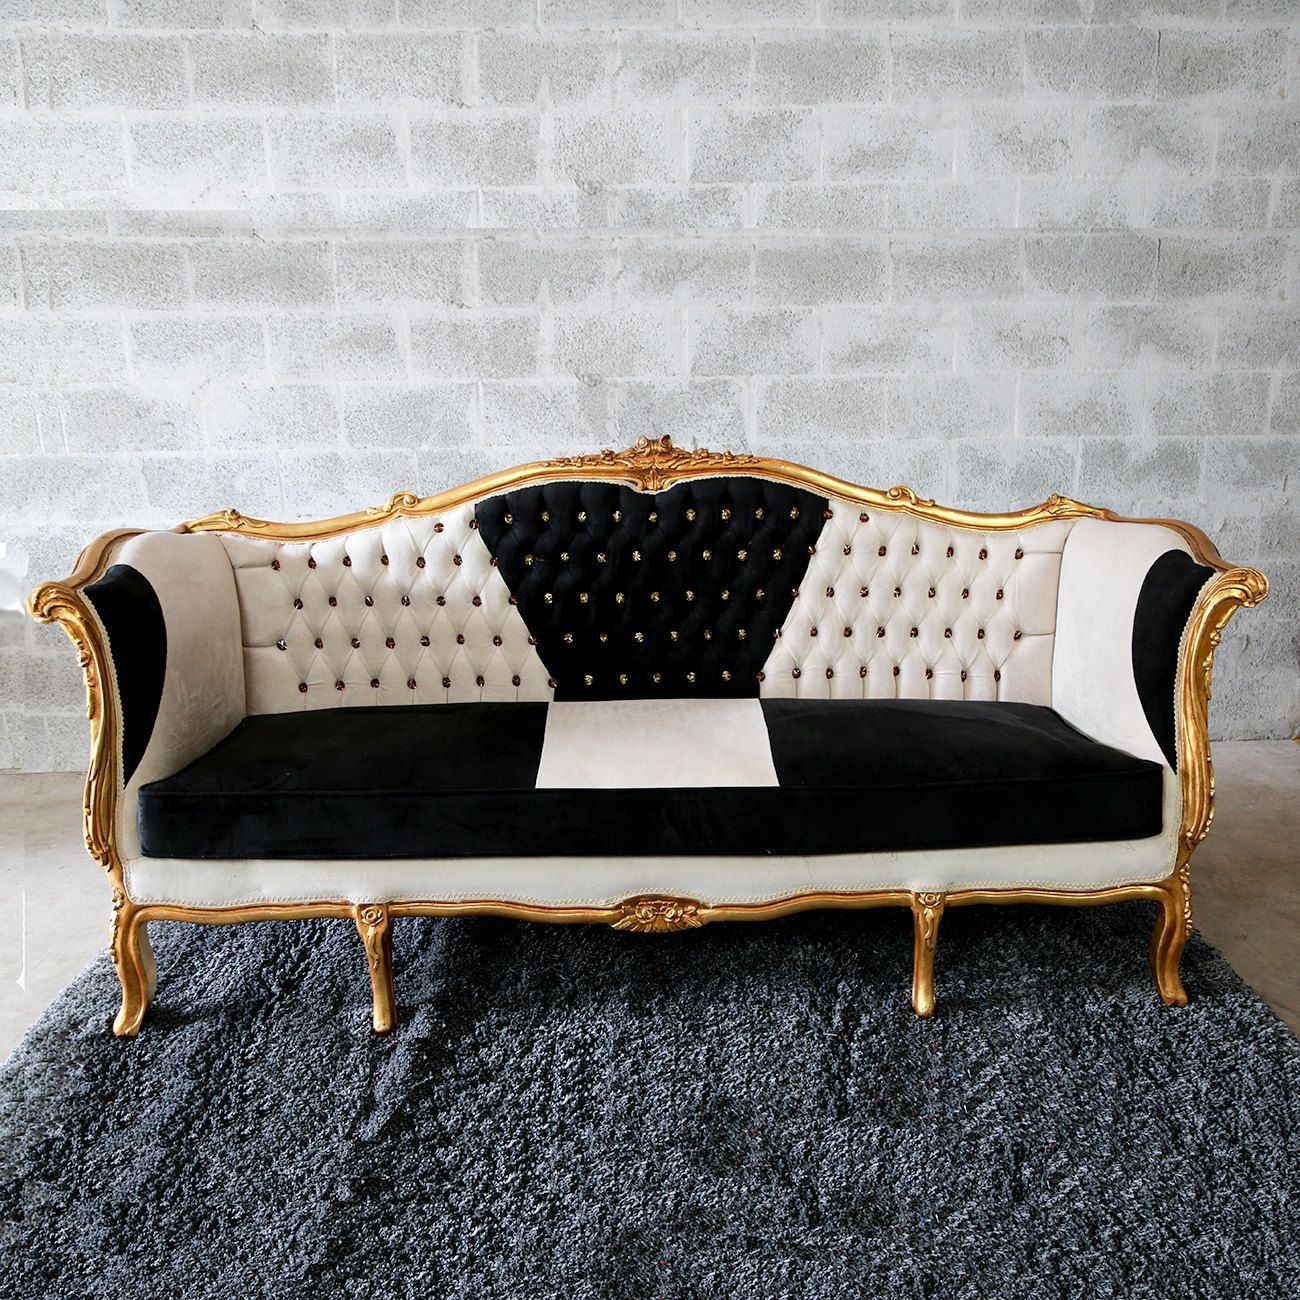 Baroque Tufted Settee Furniture Italian Antique Sofa Inside 4Pc French Seamed Sectional Sofas Velvet Black (View 9 of 15)